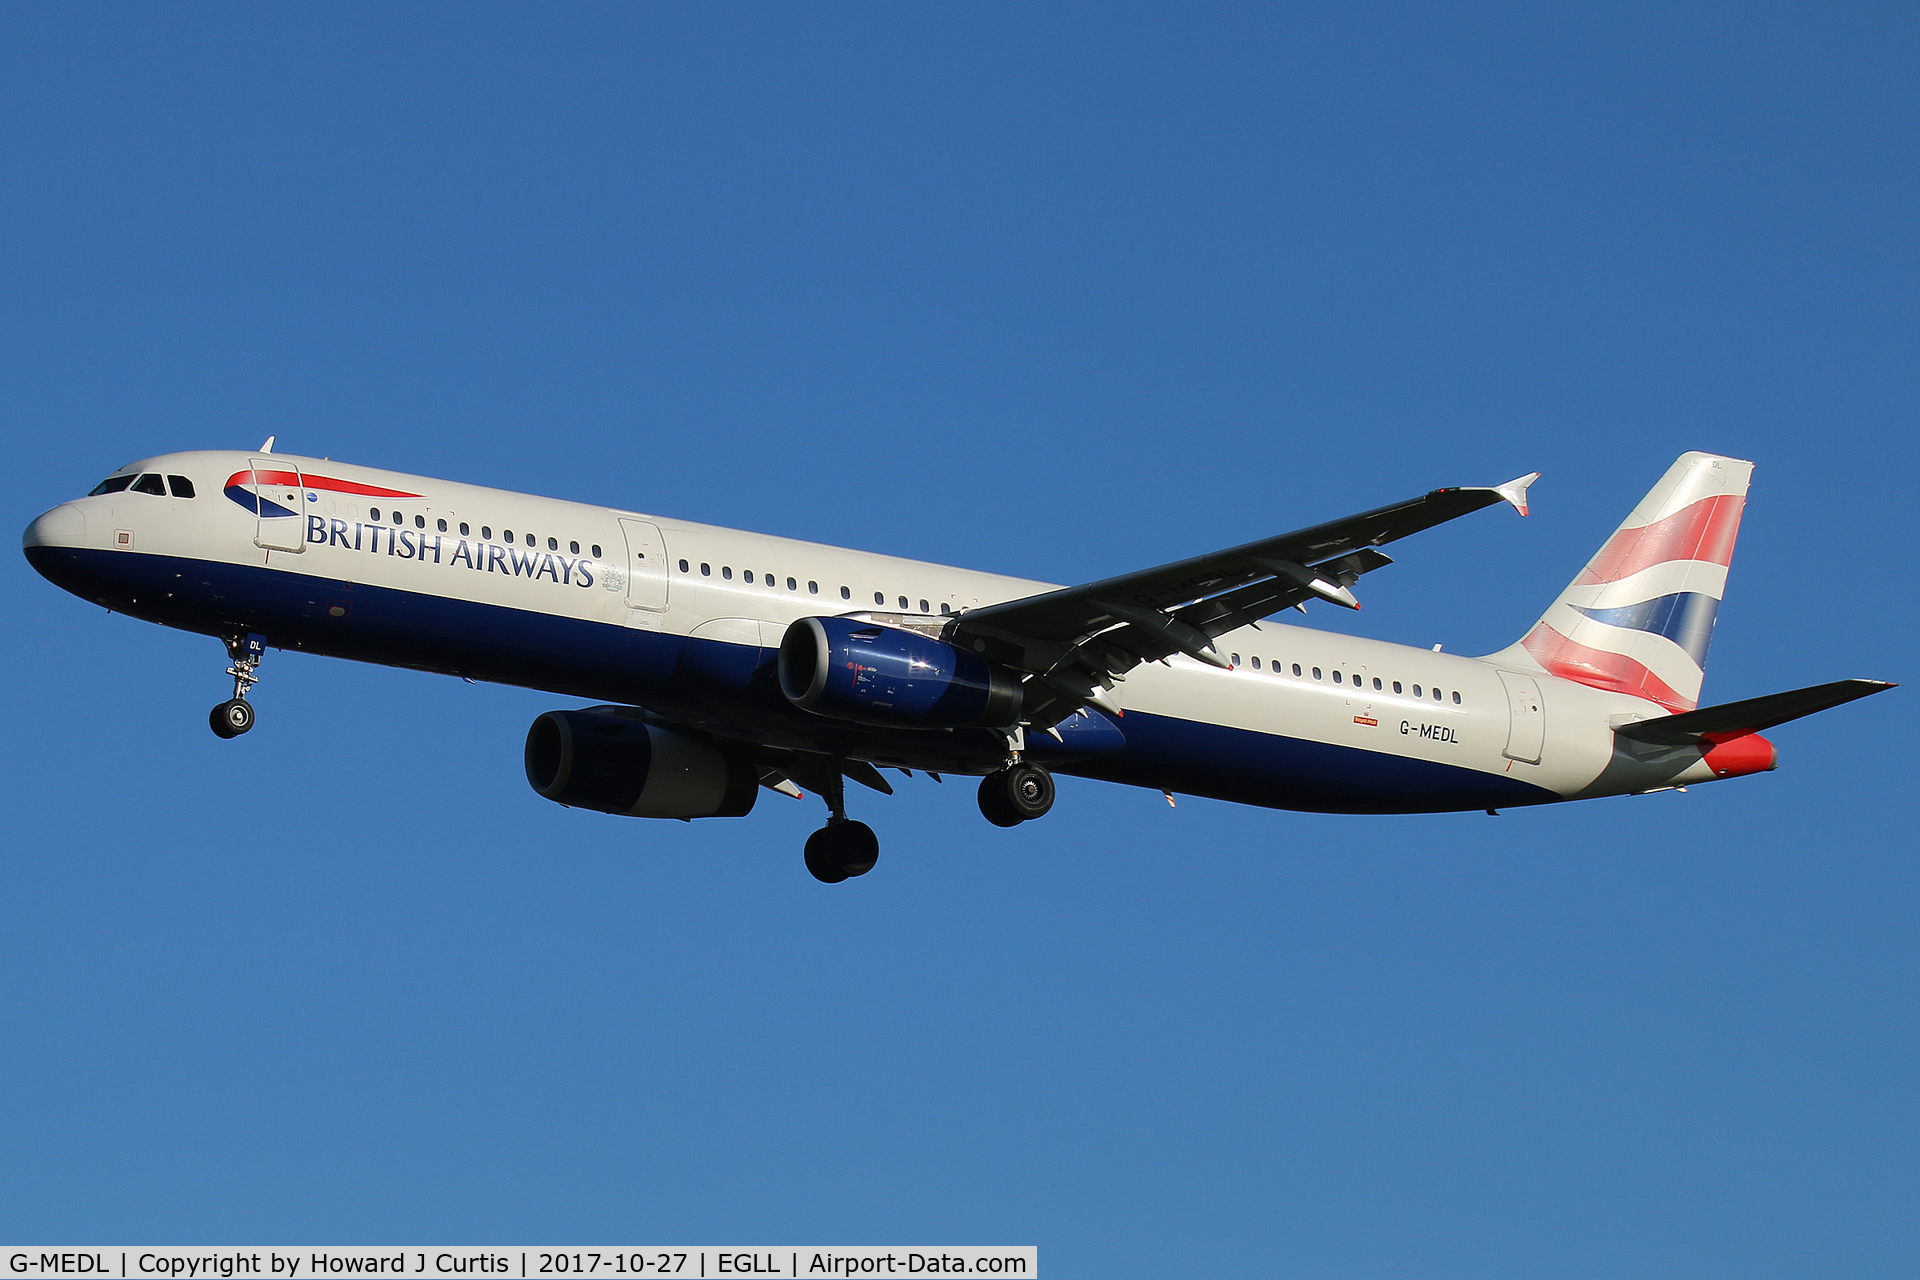 G-MEDL, 2006 Airbus A321-231 C/N 2653, On approach.